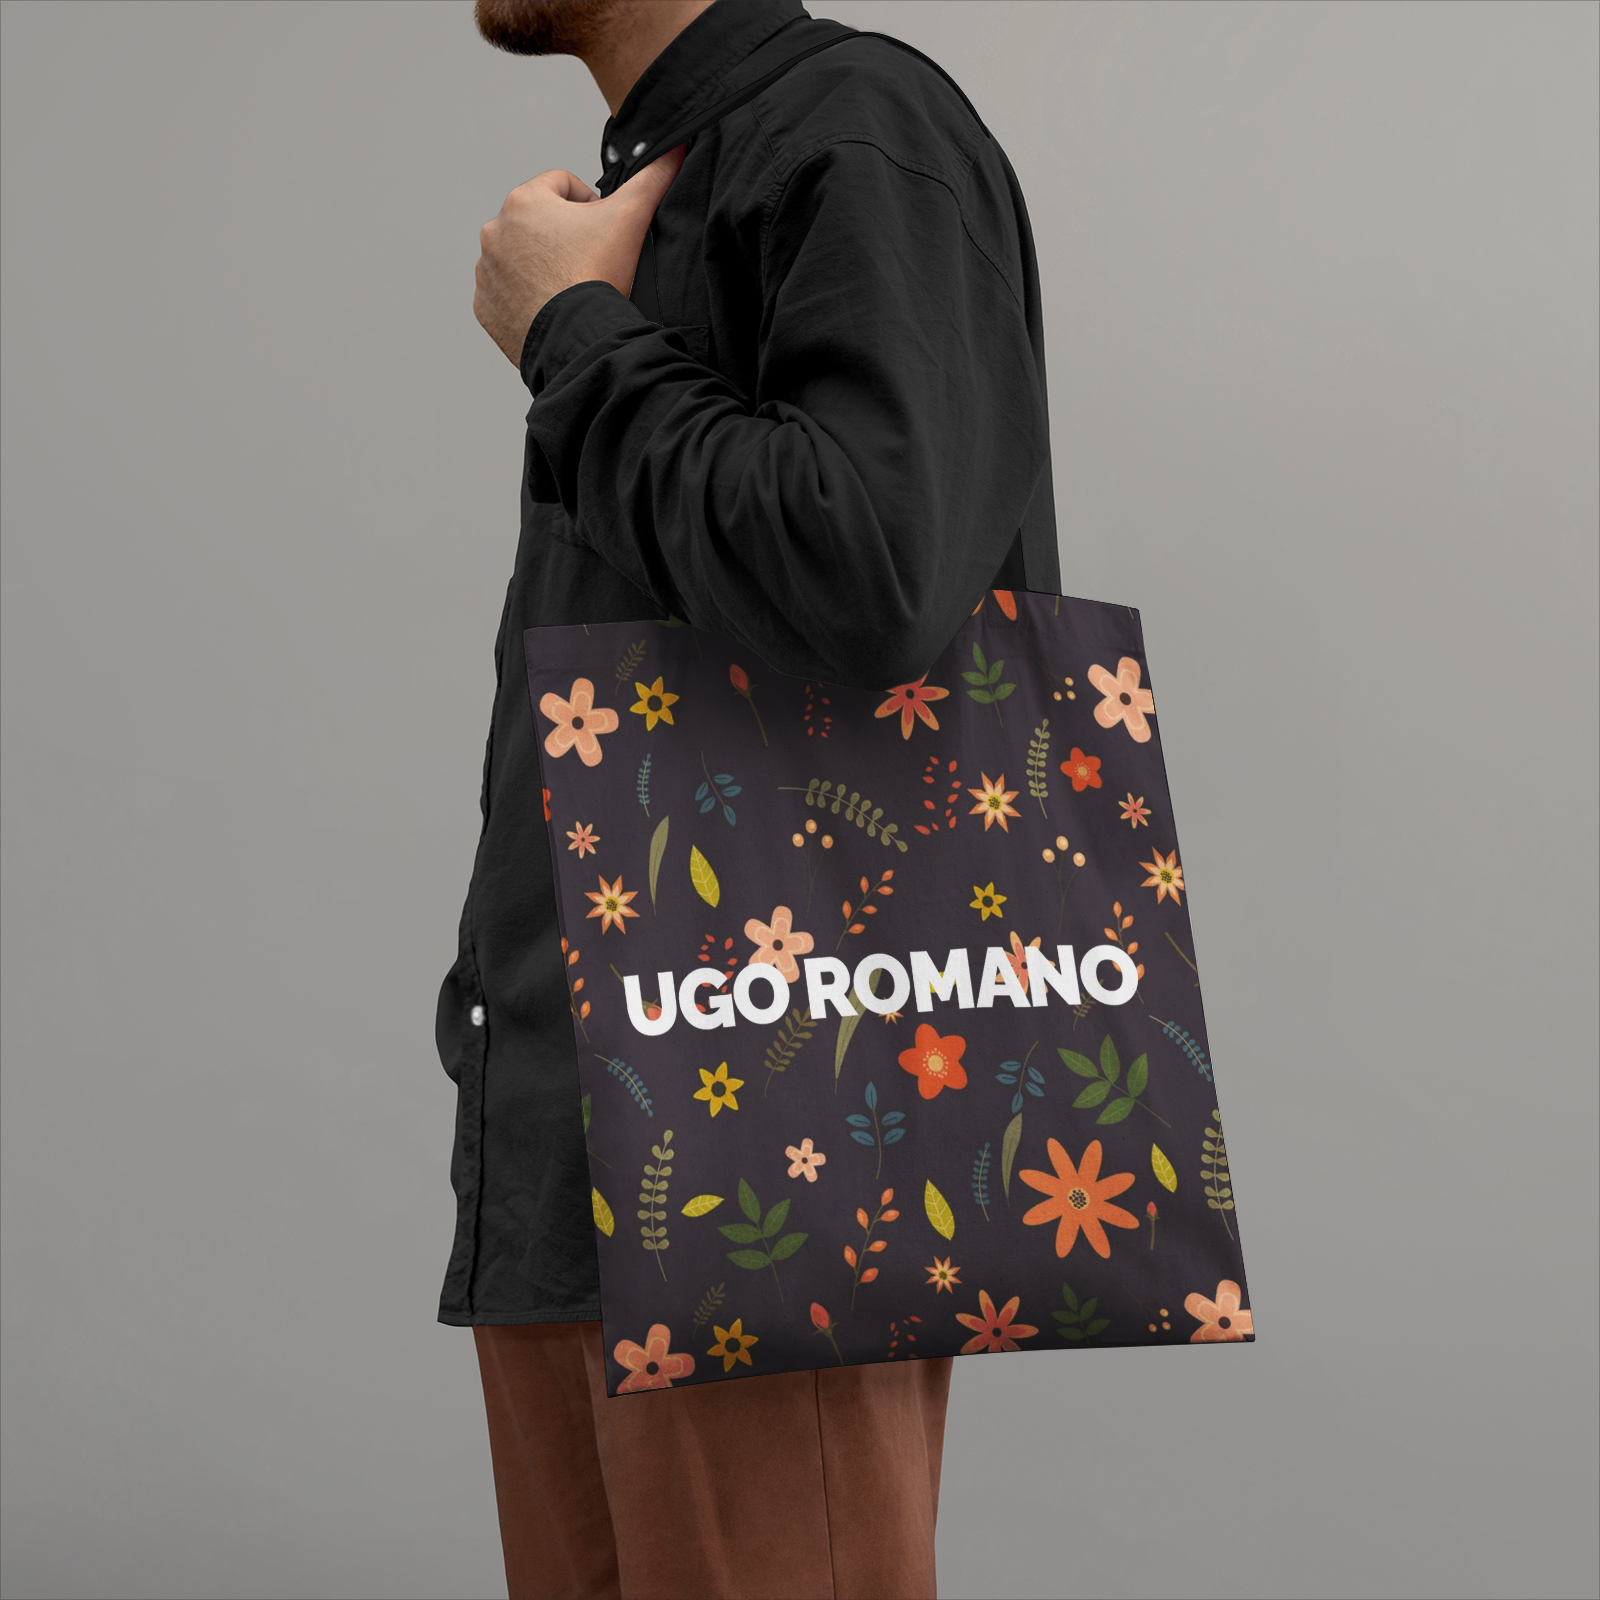 Heavy Duty and Strong Natural Cotton Canvas Tote Bag - UGO ROMANO URTB059